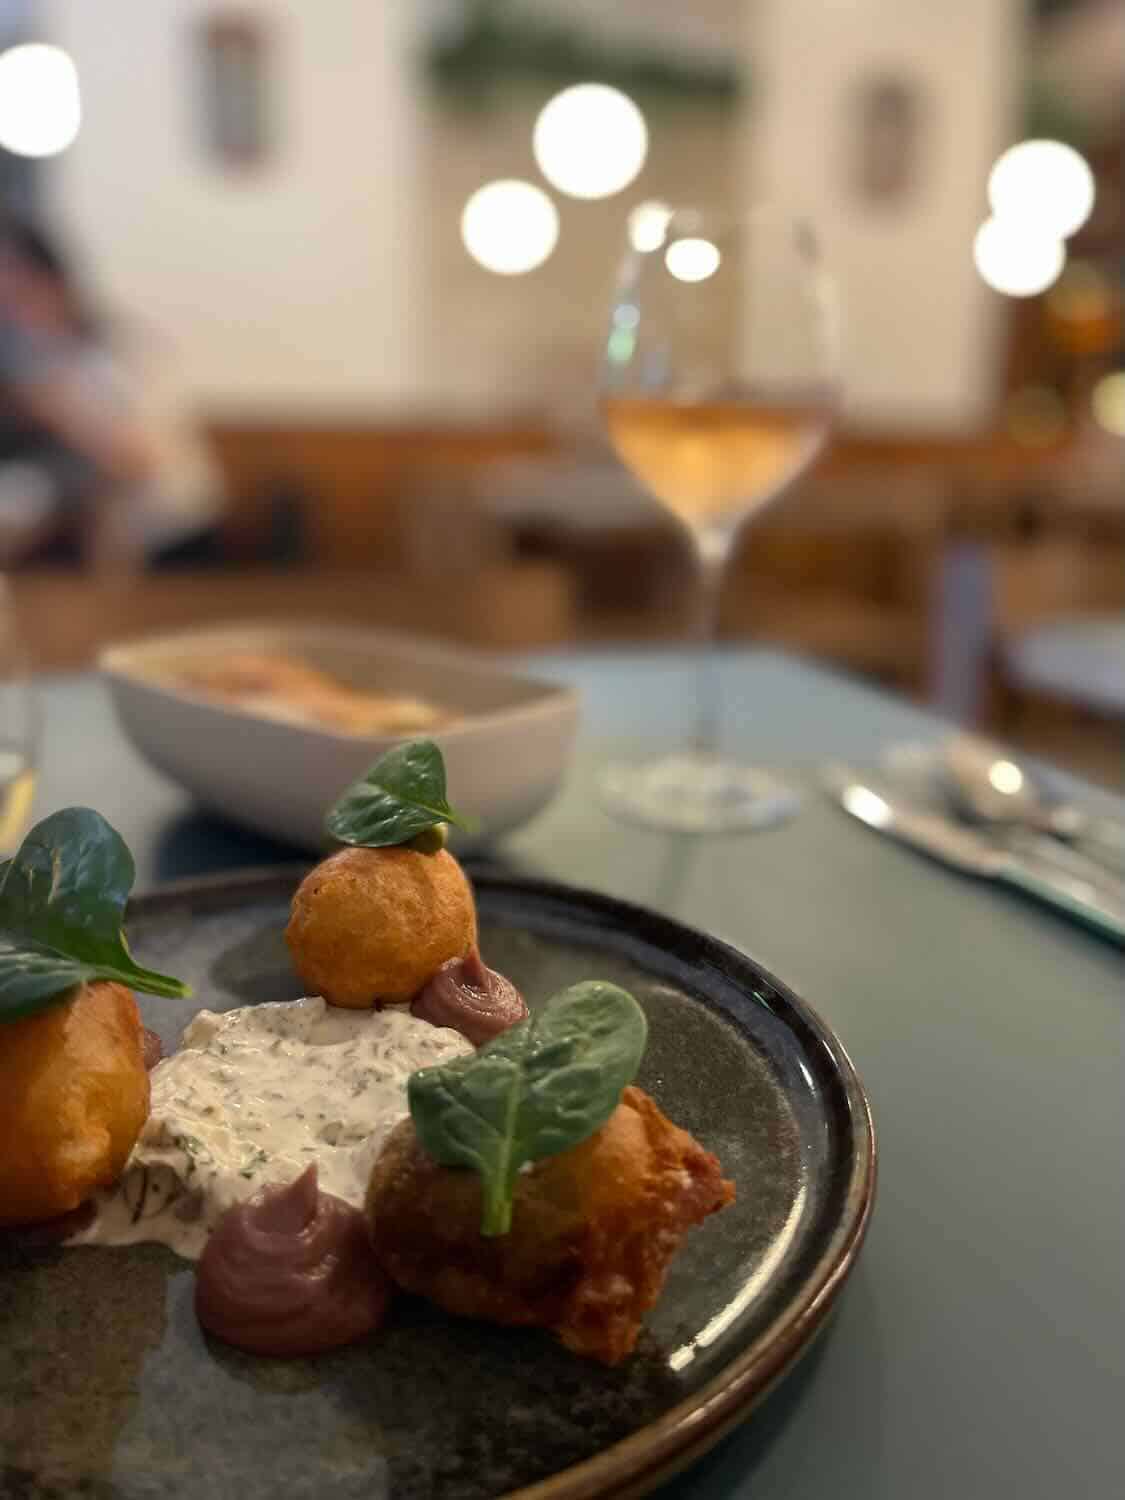 An intimate dining scene featuring deep-fried gourmet bites with dipping sauces on a ceramic plate, focused sharply in the foreground. A glass of rosé wine adds a touch of elegance to the relaxed ambiance of the restaurant, with blurred background details creating a cozy dining atmosphere.